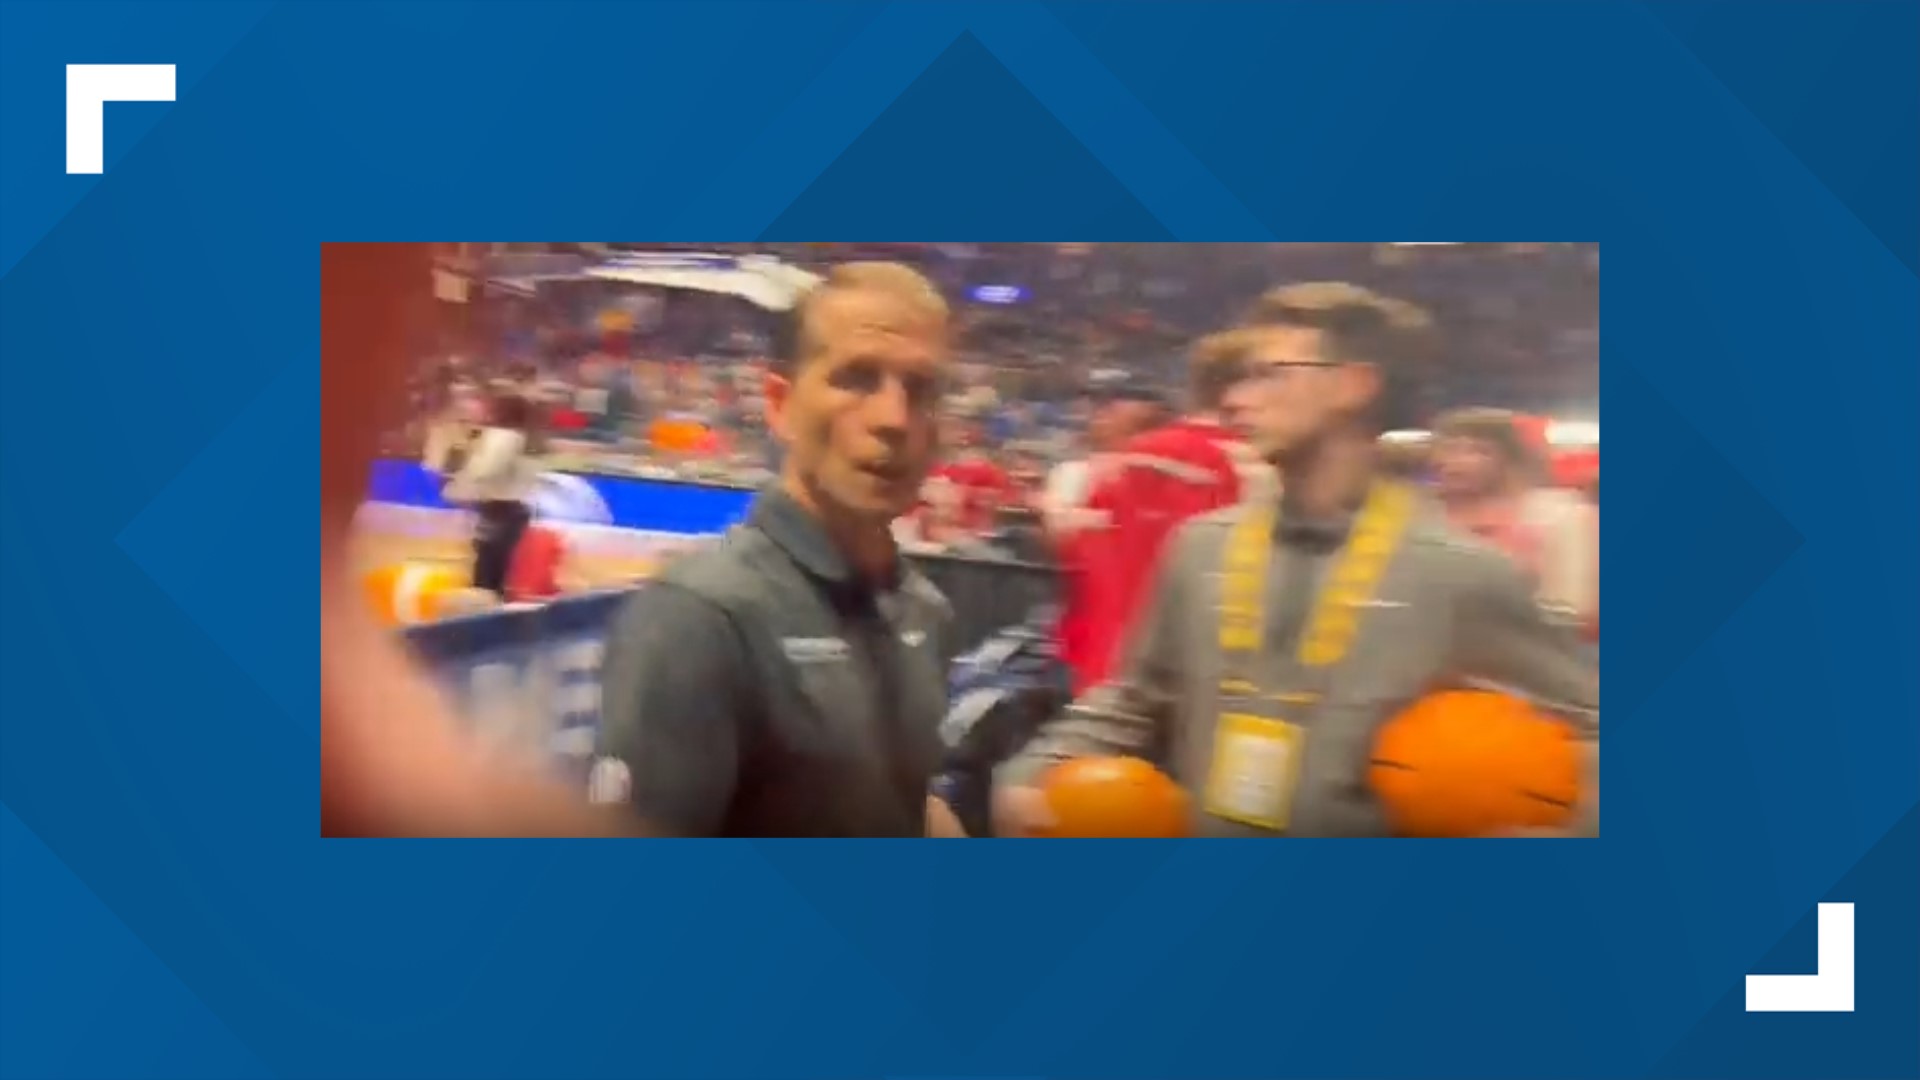 Director of Internal Operations for Arkansas Men’s Basketball, Riley Hall, allegedly grabbed a photojournalist's phone and threw it on the ground.